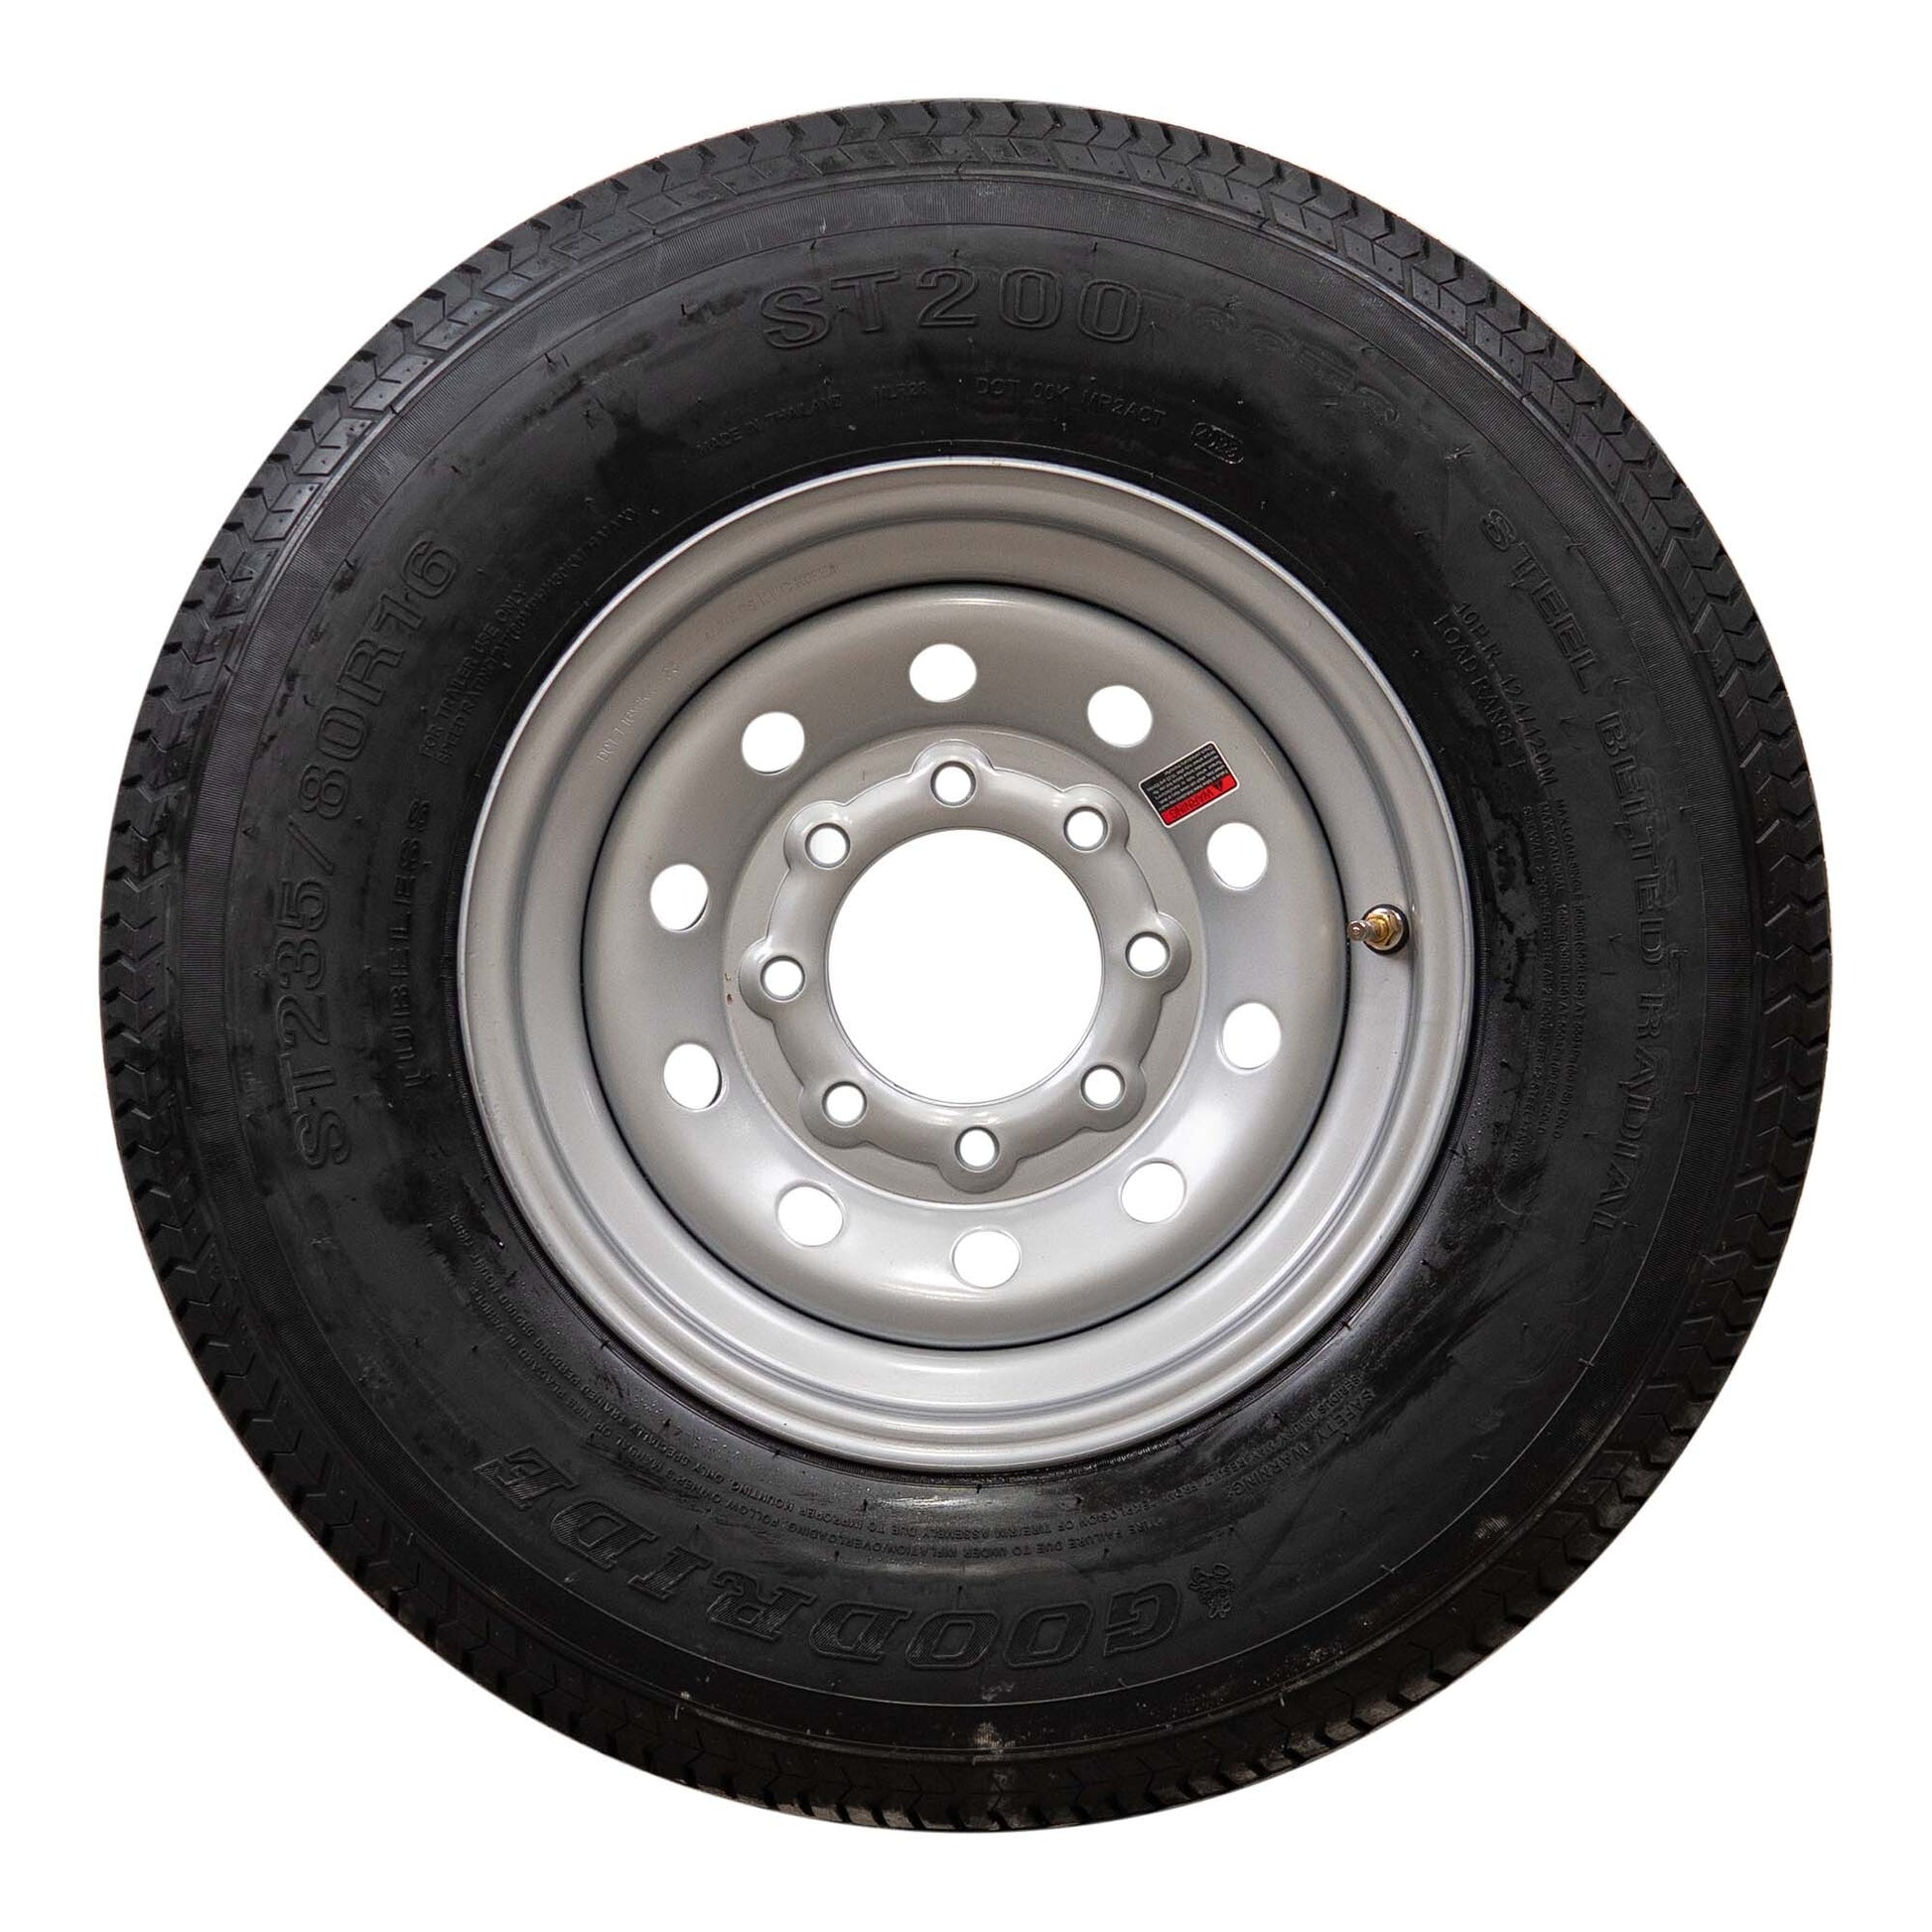 Goodride 16" 10 ply Radial Trailer Tire & Wheel - ST235/80 R16 8 Lug (Silver Mod) - The Trailer Parts Outlet